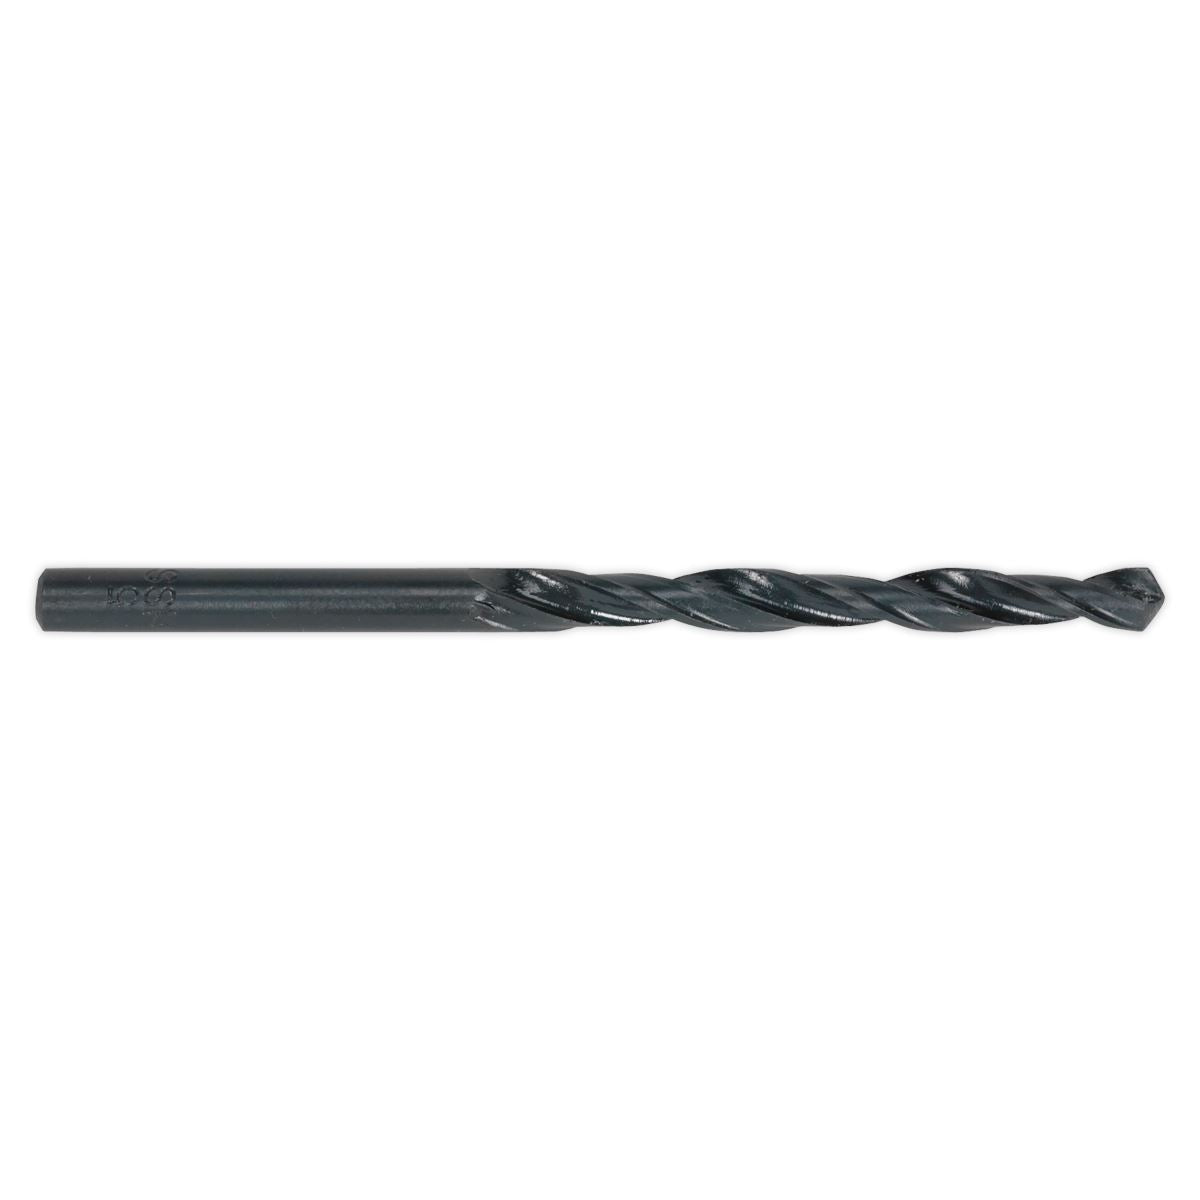 Sealey HSS Roll Forged Drill Bit Ø1/8" Pack of 10